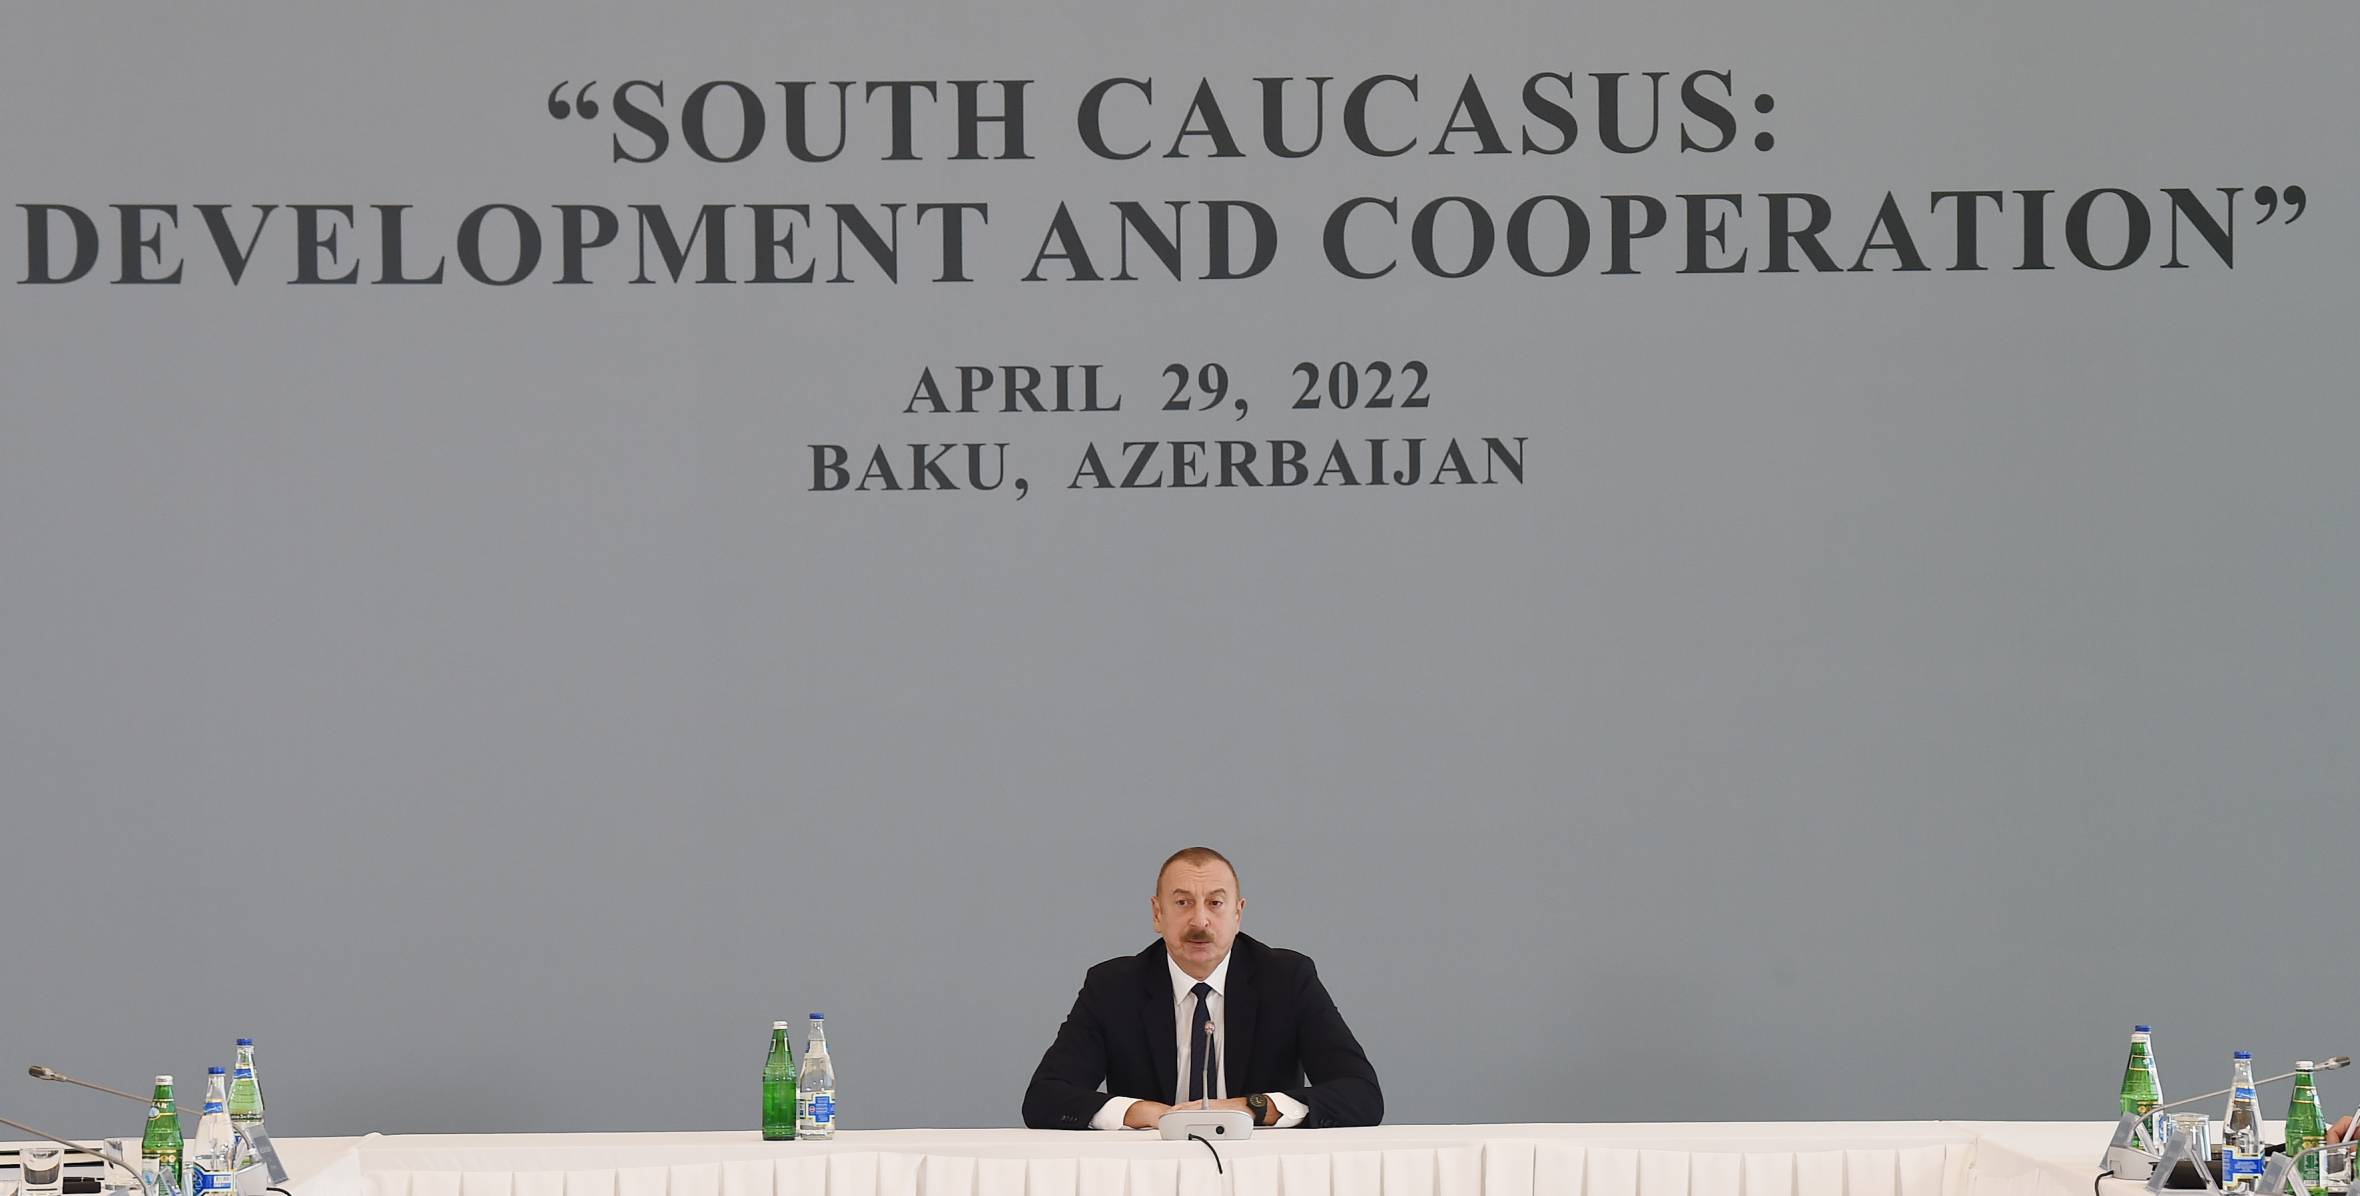 Ilham Aliyev attended the international conference themed “South Caucasus: Development and Cooperation” at ADA University